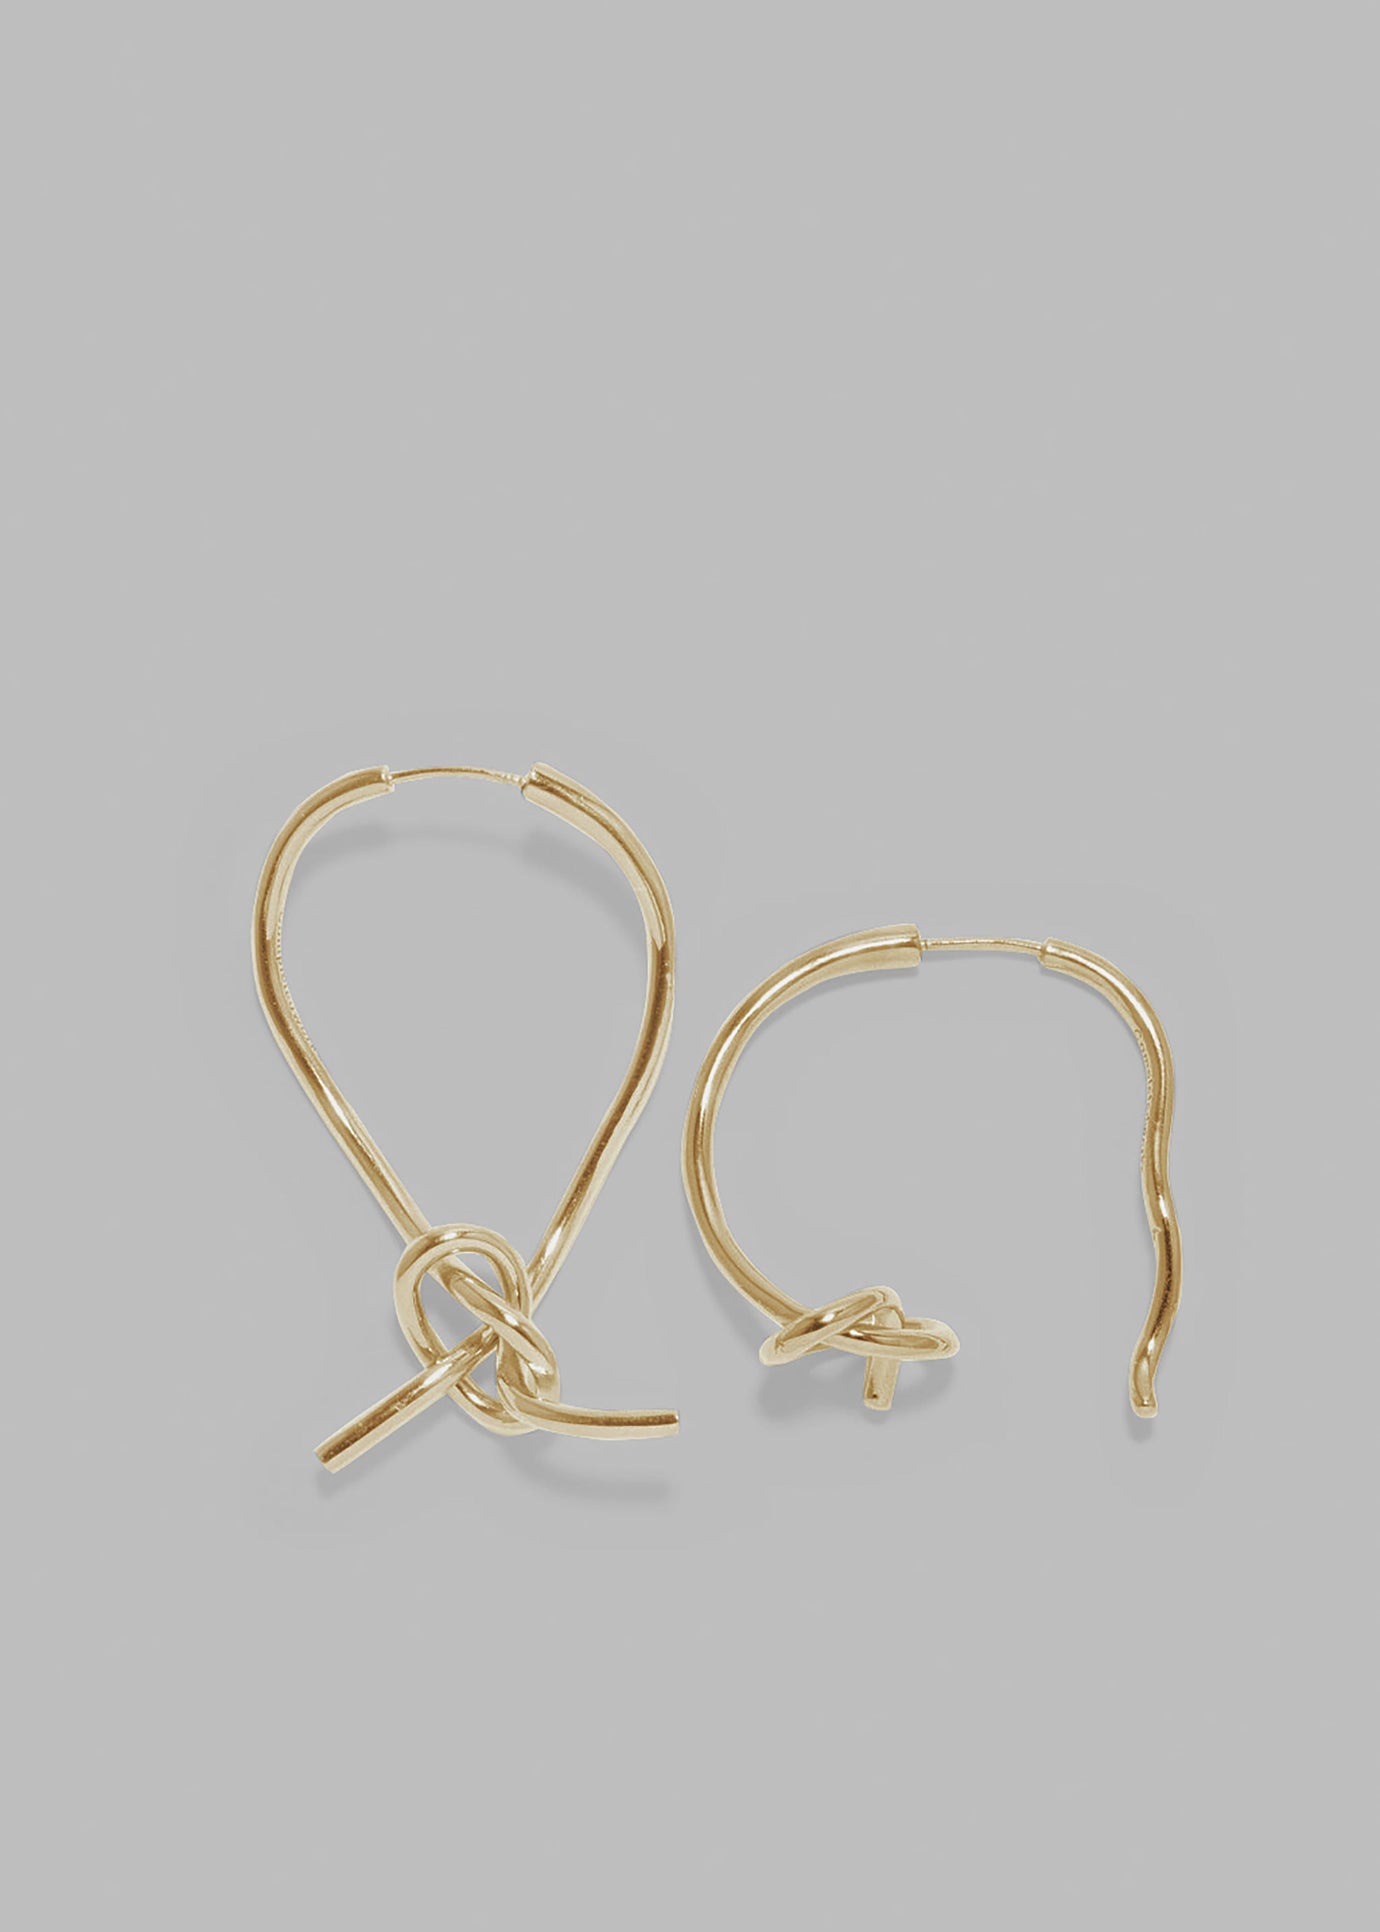 Completedworks V031 Vermeil Earrings - Recycled Silver